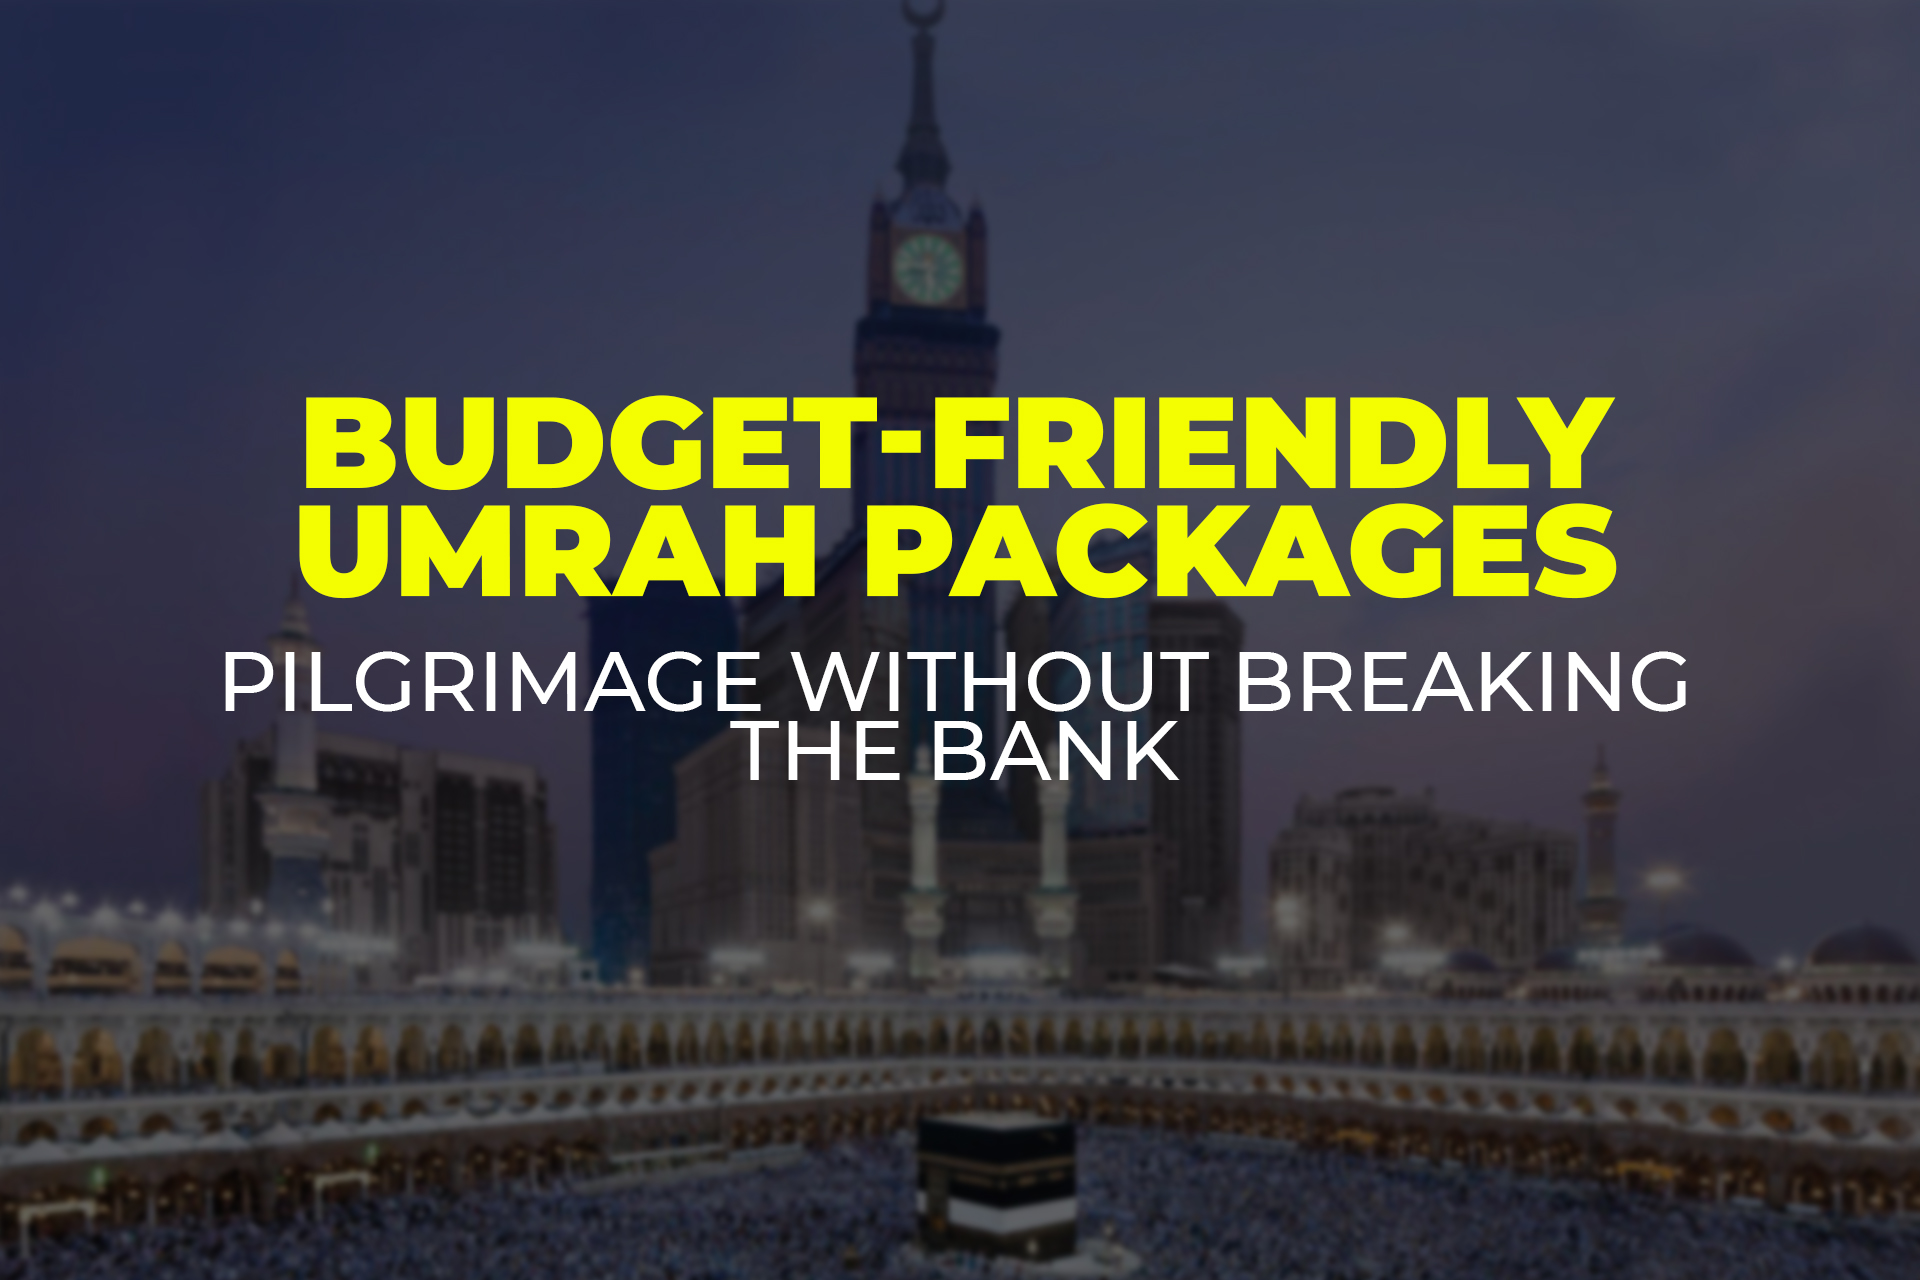 Budget-Friendly Umrah Packages: Pilgrimage without Breaking the Bank